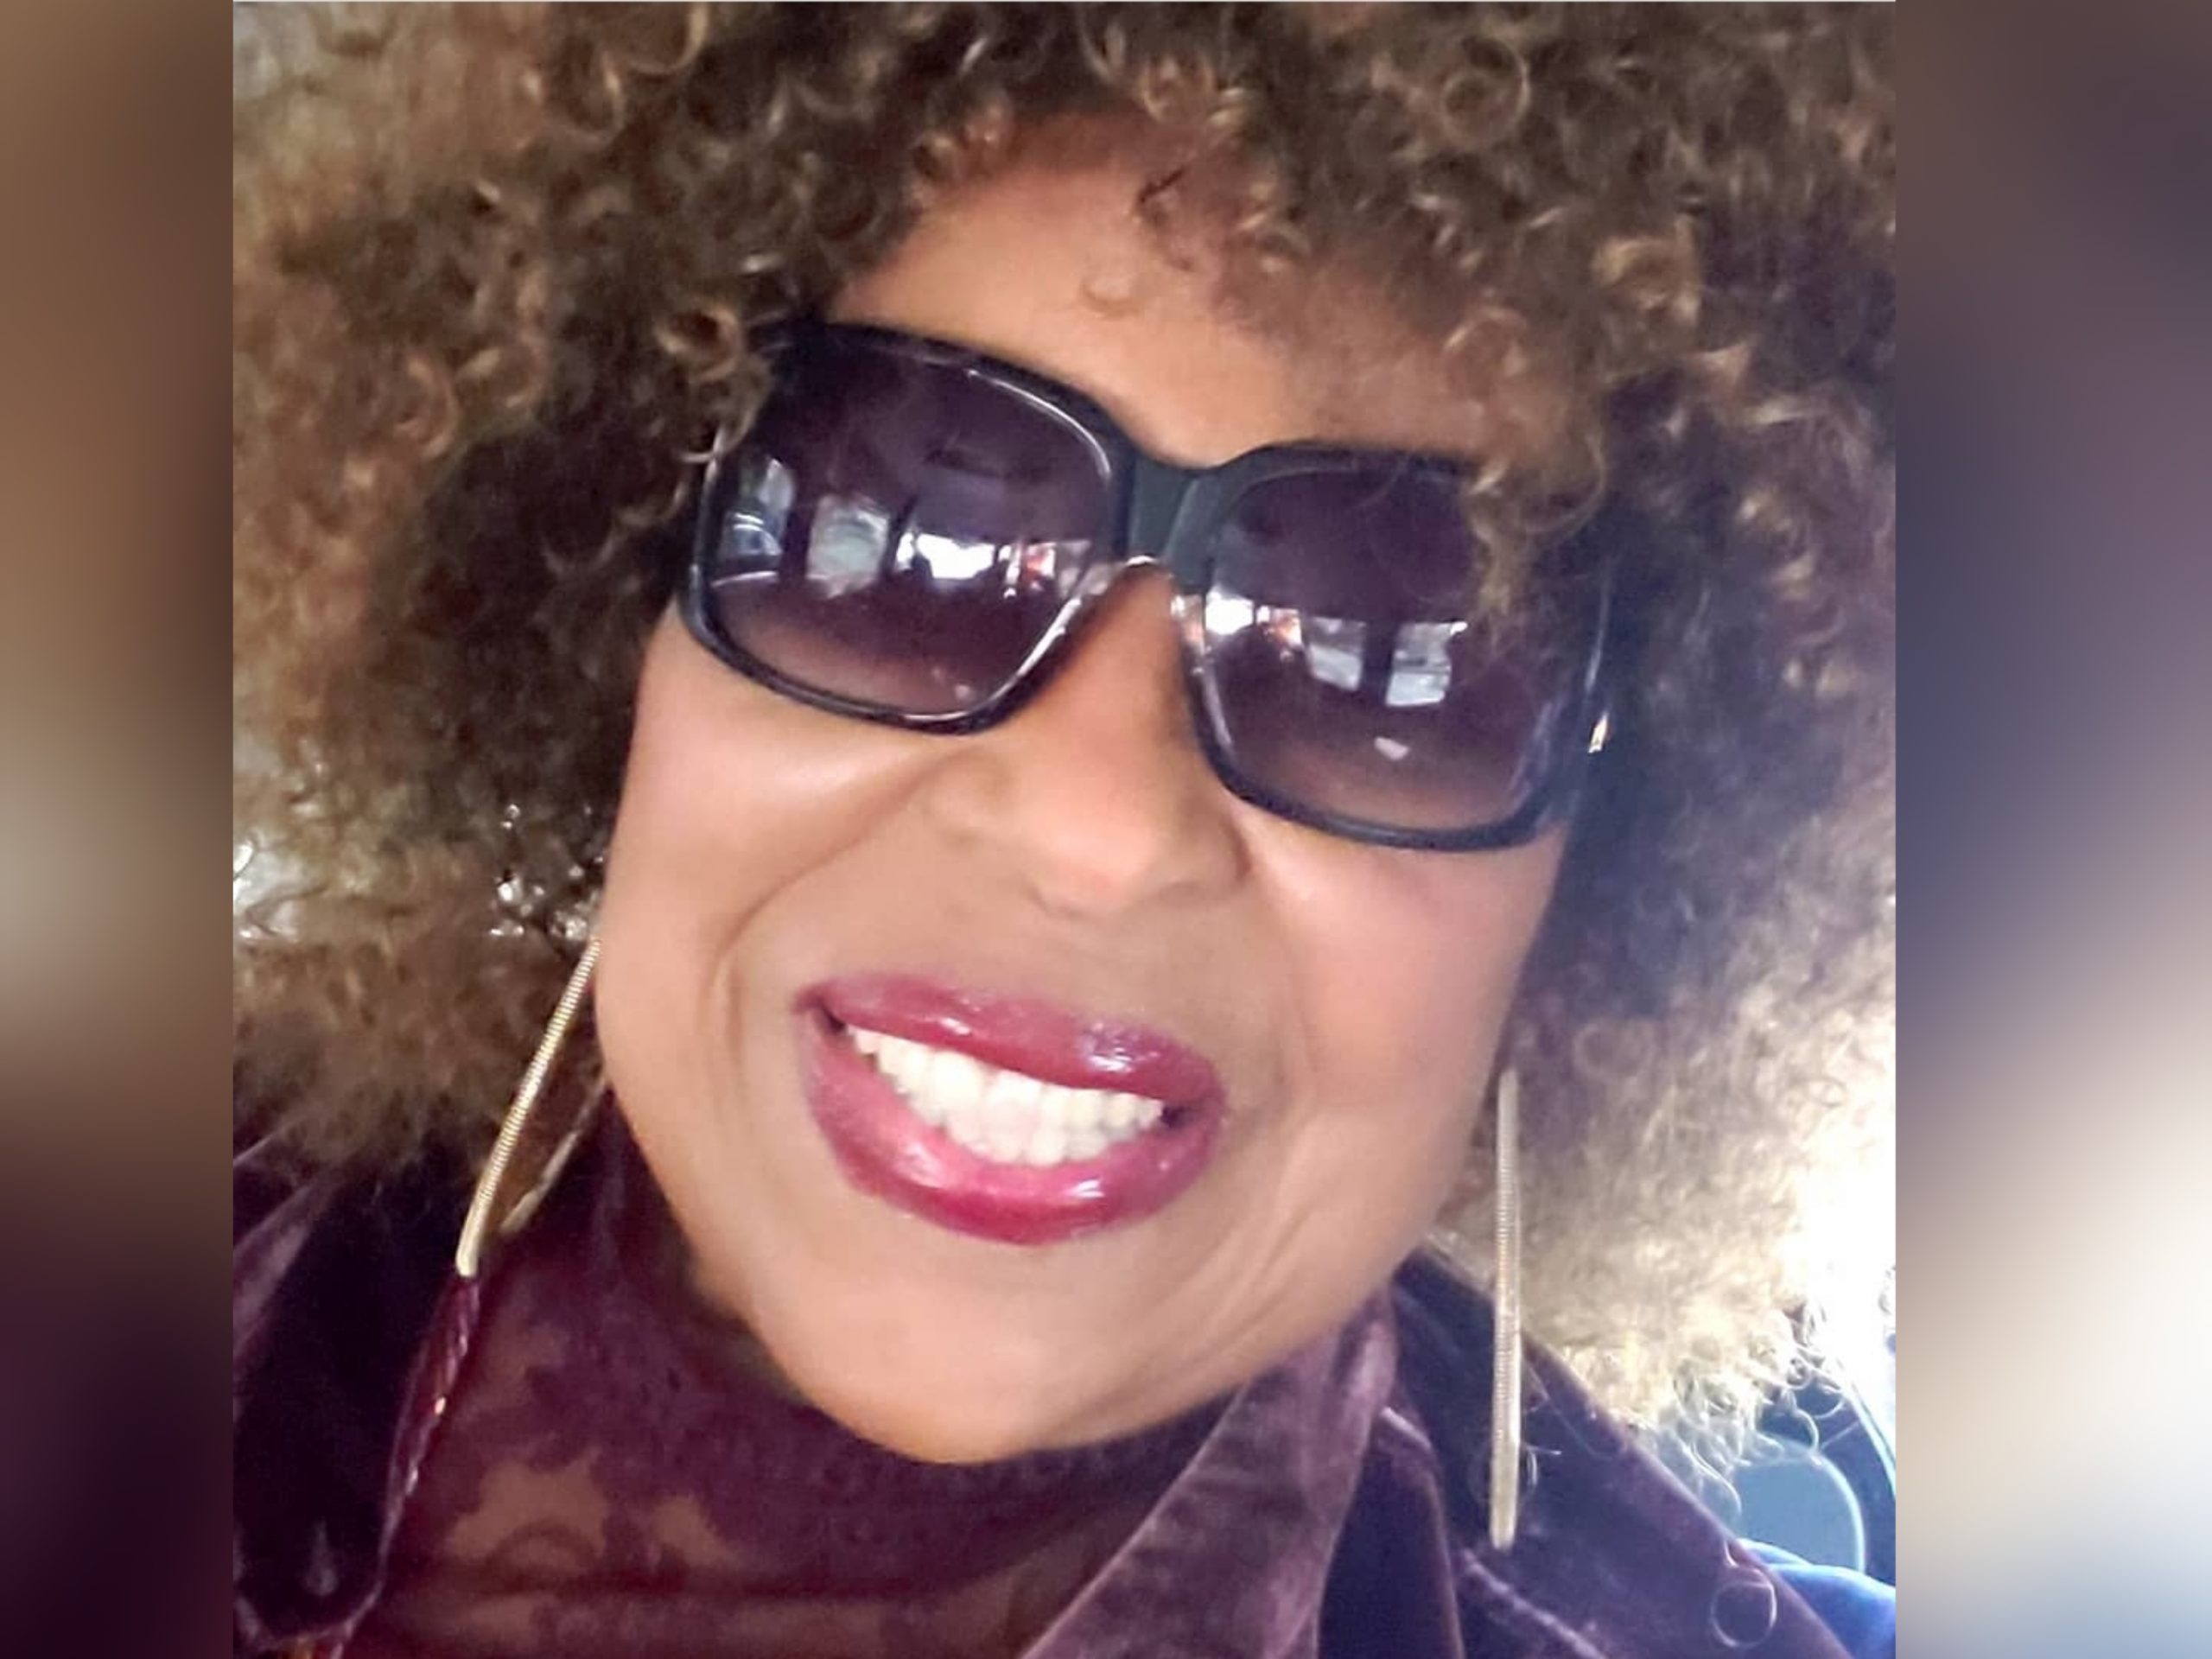 Roberta Flack Diagnosed With ALS, Making It “Impossible To Sing”